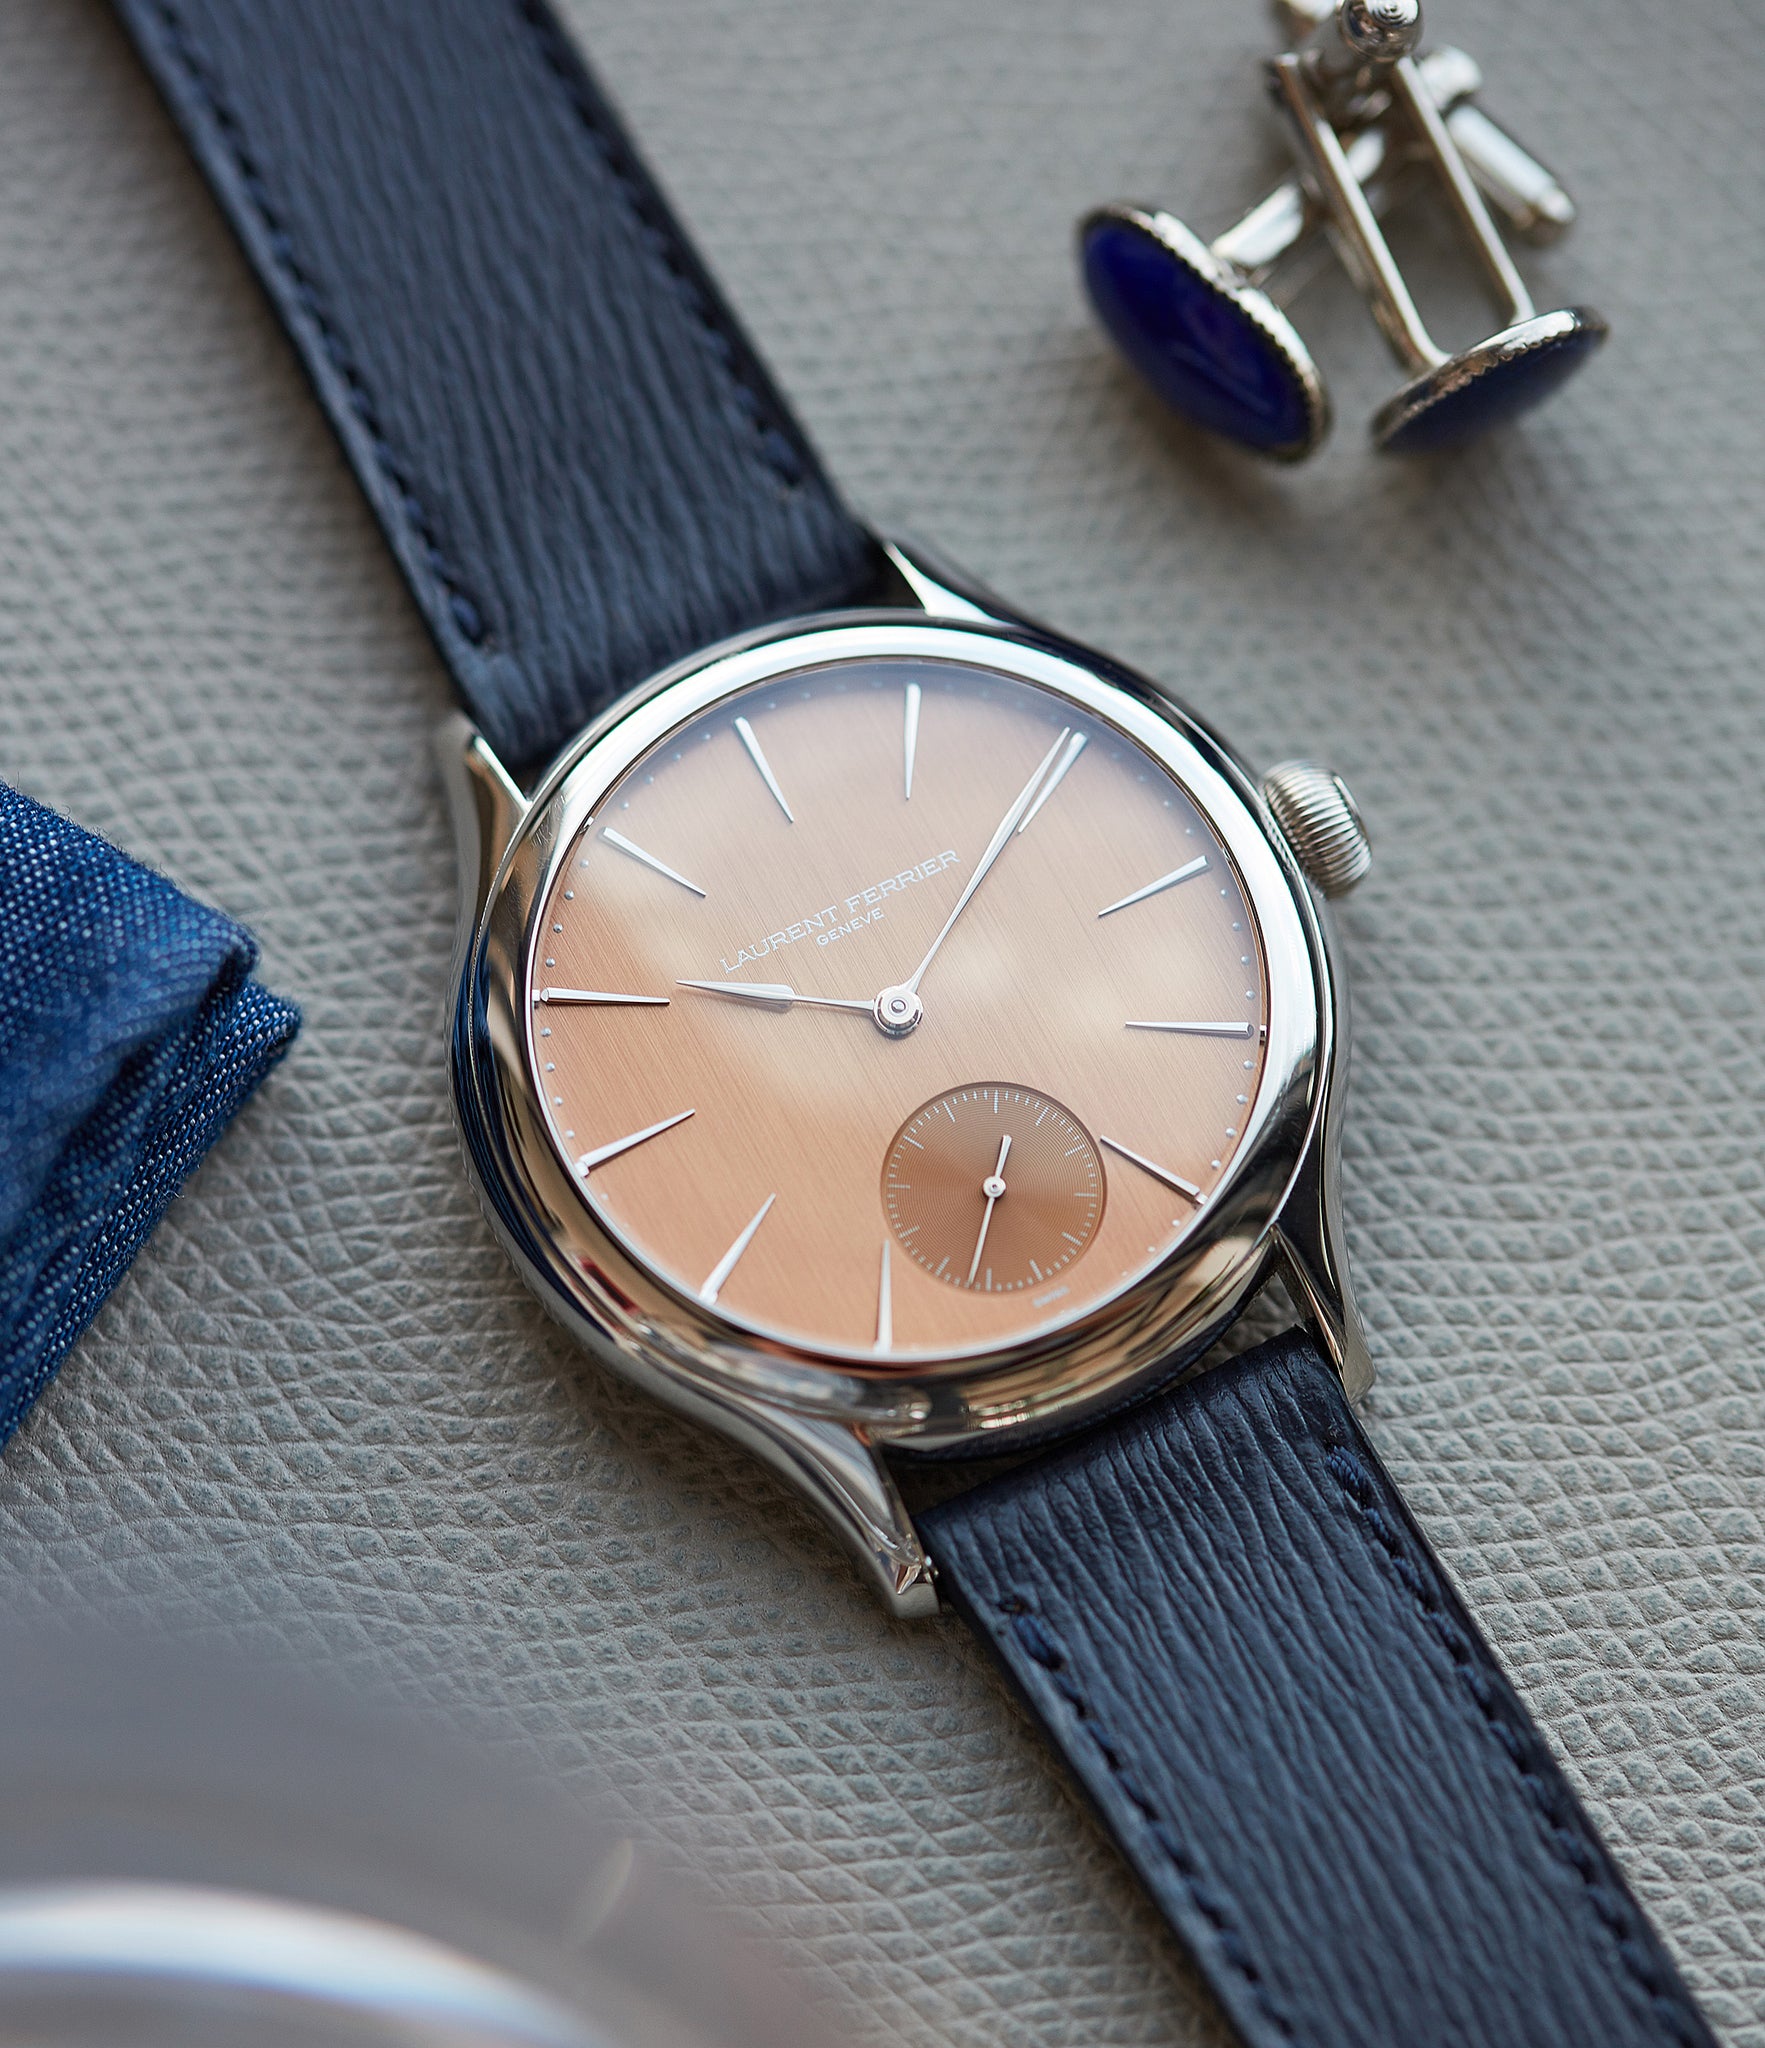 pink dial Laurent Ferrier Galet Micro-rotor FBN 229.01 steel rare watch for sale online at A Collected Man London approved re-seller of independent watchmakers